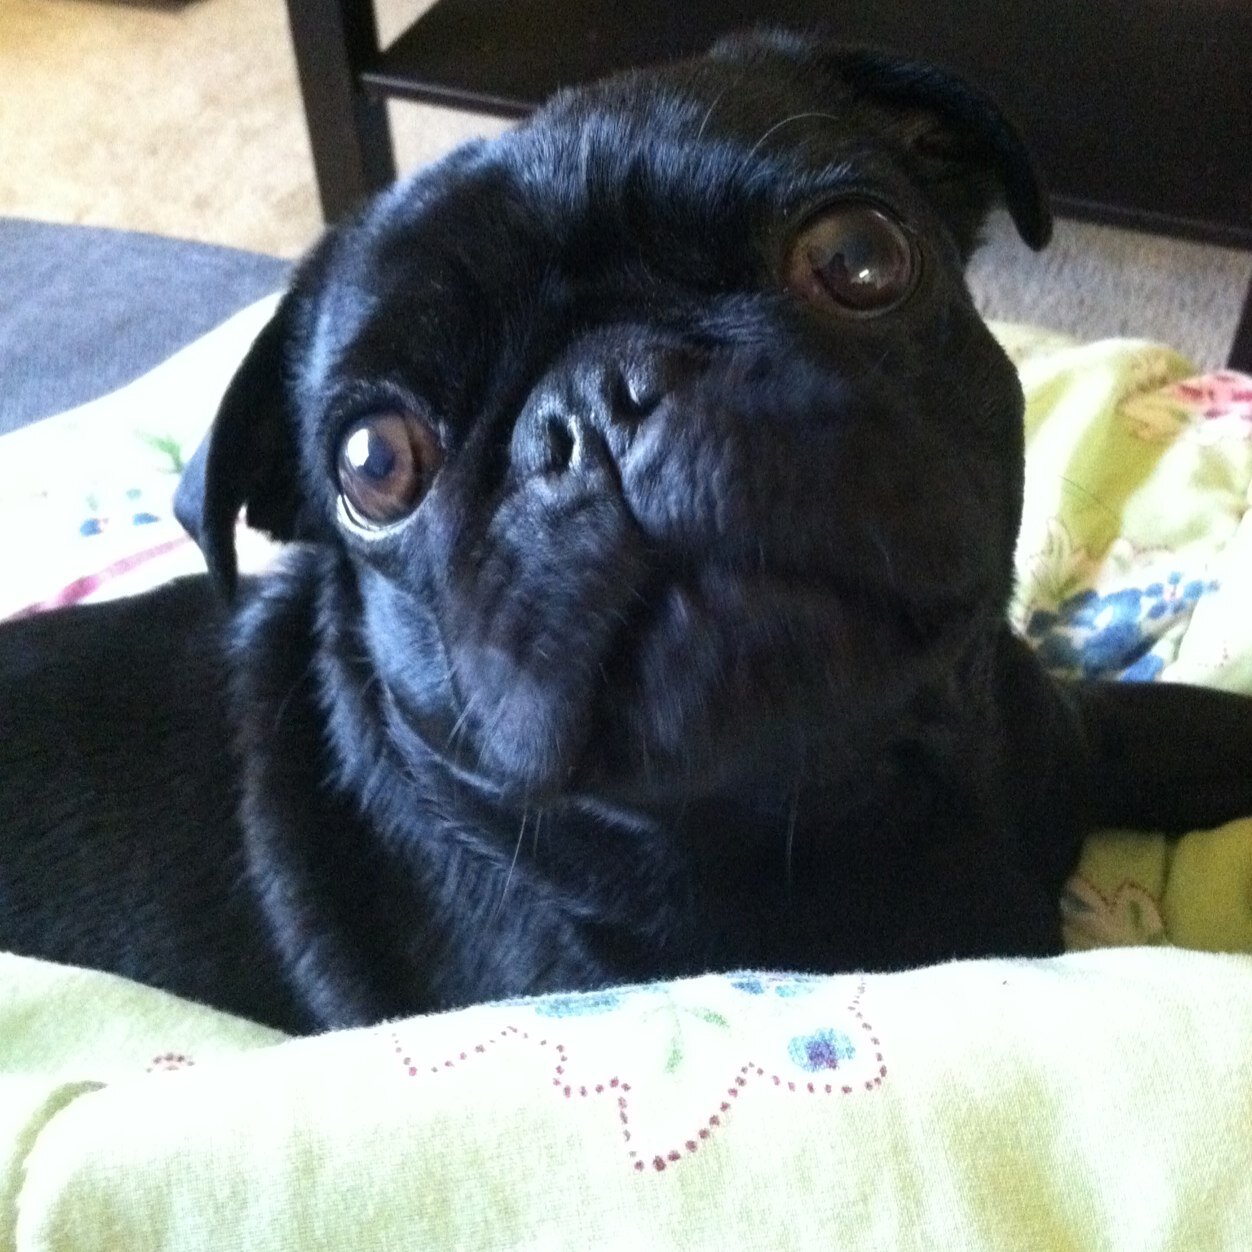 I'm a little black pug living in Vancouver Wa. I love playing with all of my pug friends, snuggling under blankets and anything edible!